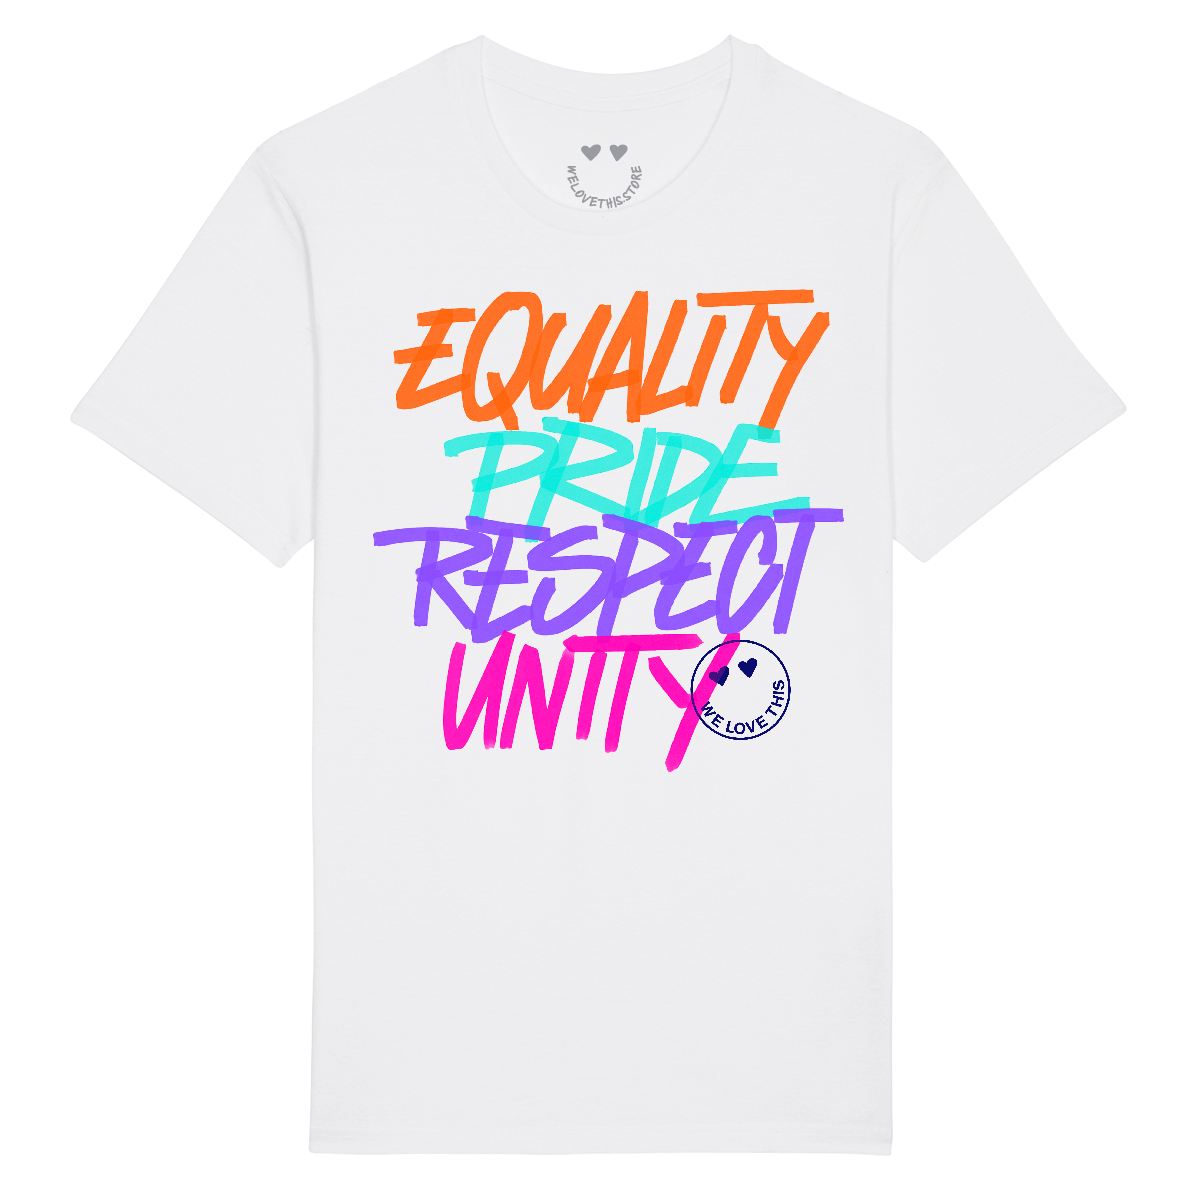 Equality Pride Respect Unity White T-Shirt